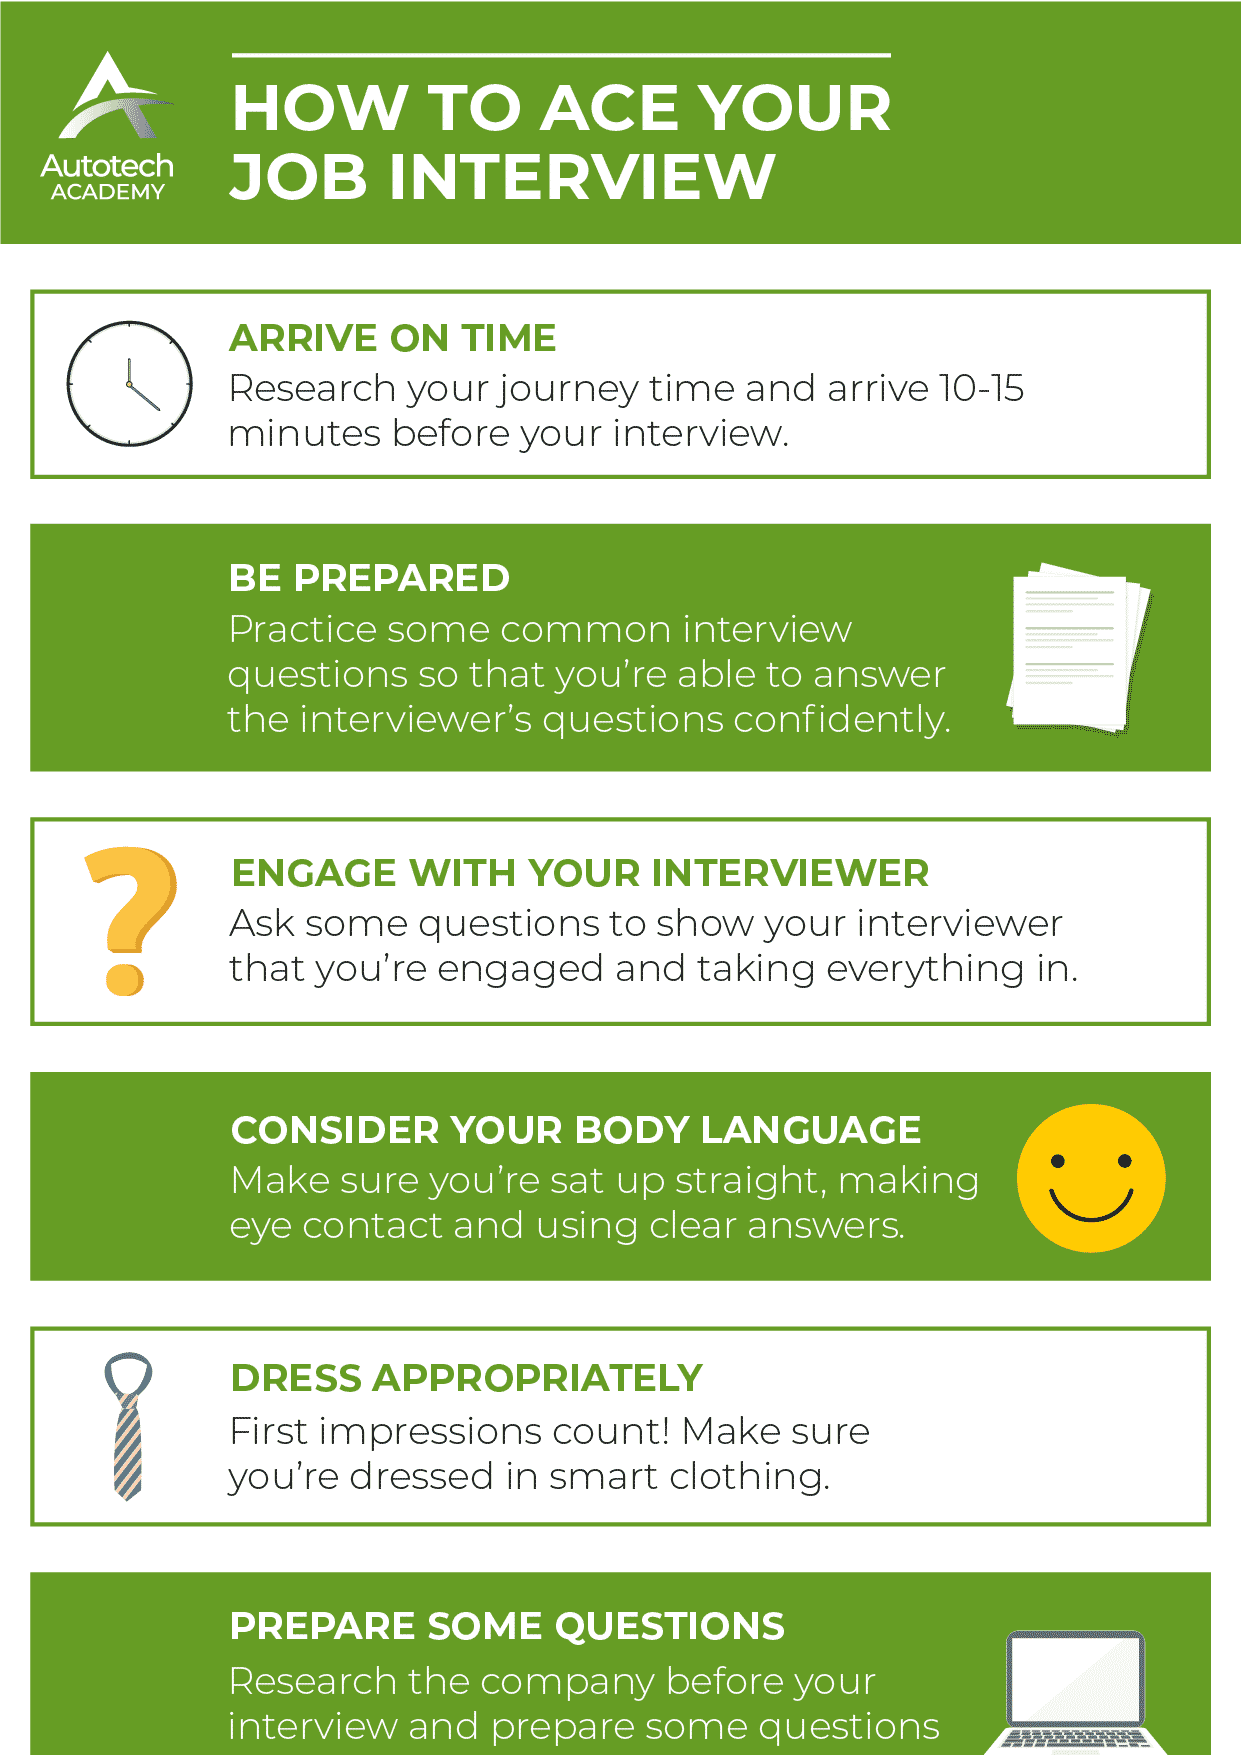 How to ace your job interview